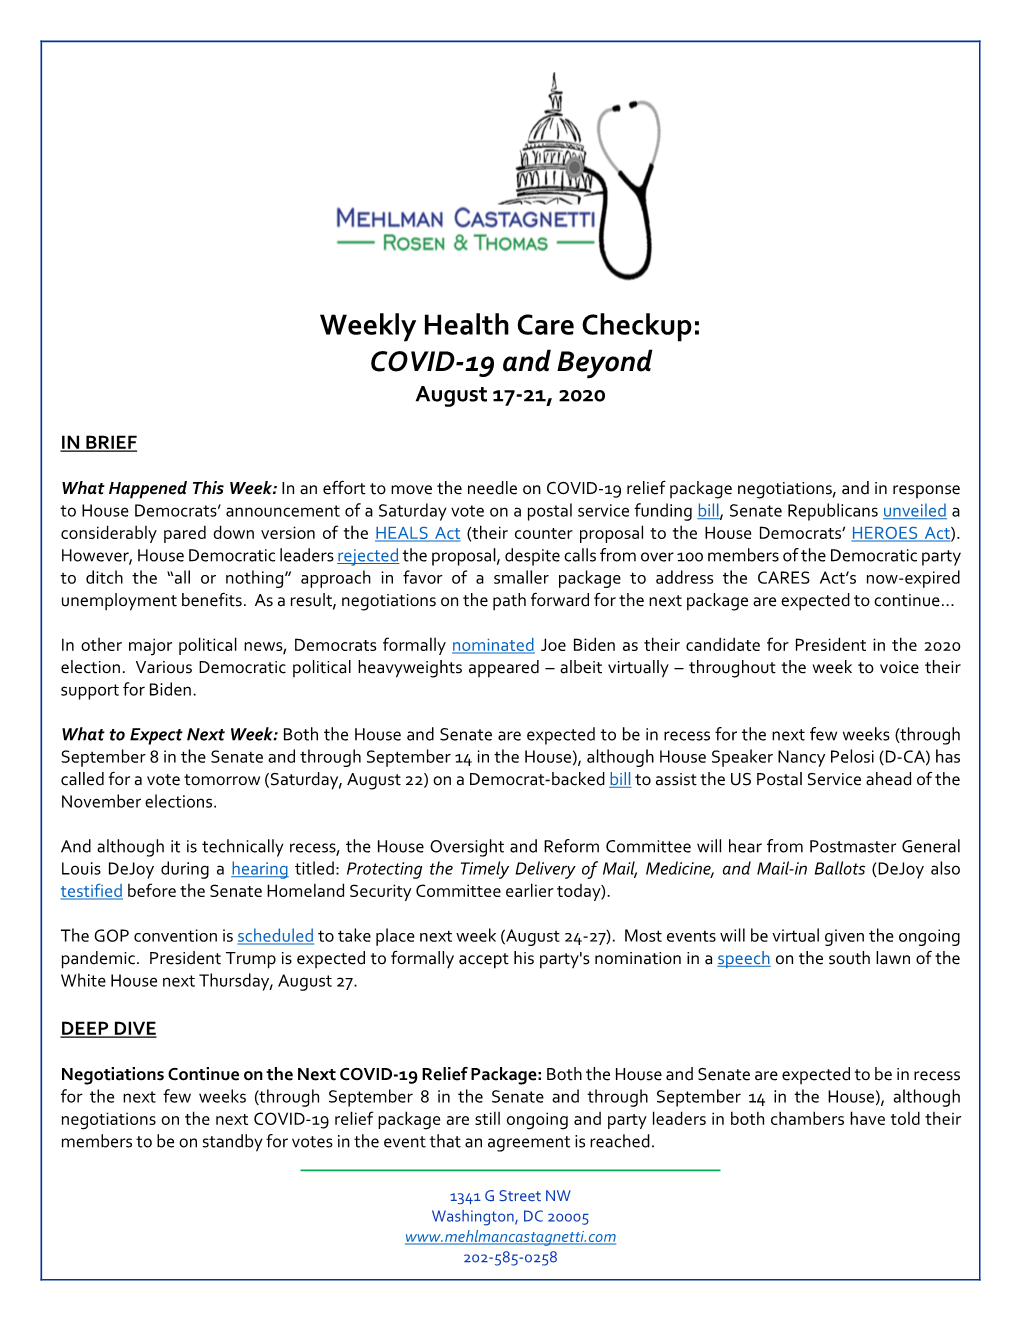 Weekly Health Care Checkup: COVID-19 and Beyond August 17-21, 2020